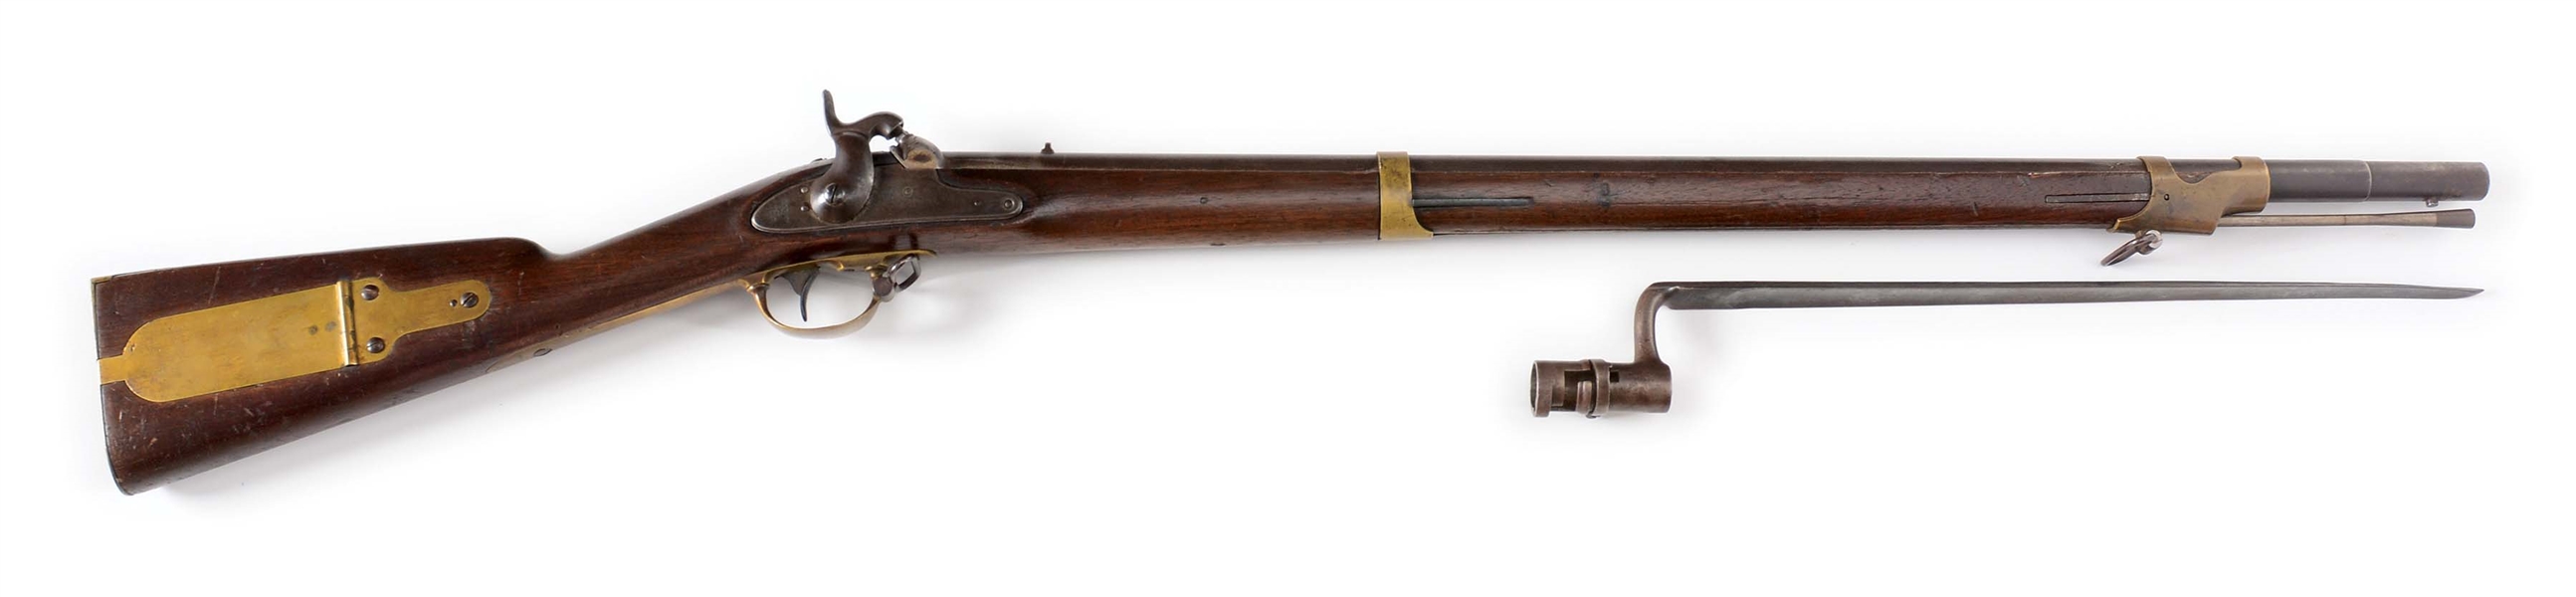 (A) 1841 TRYON MISSISSIPPI RIFLE.